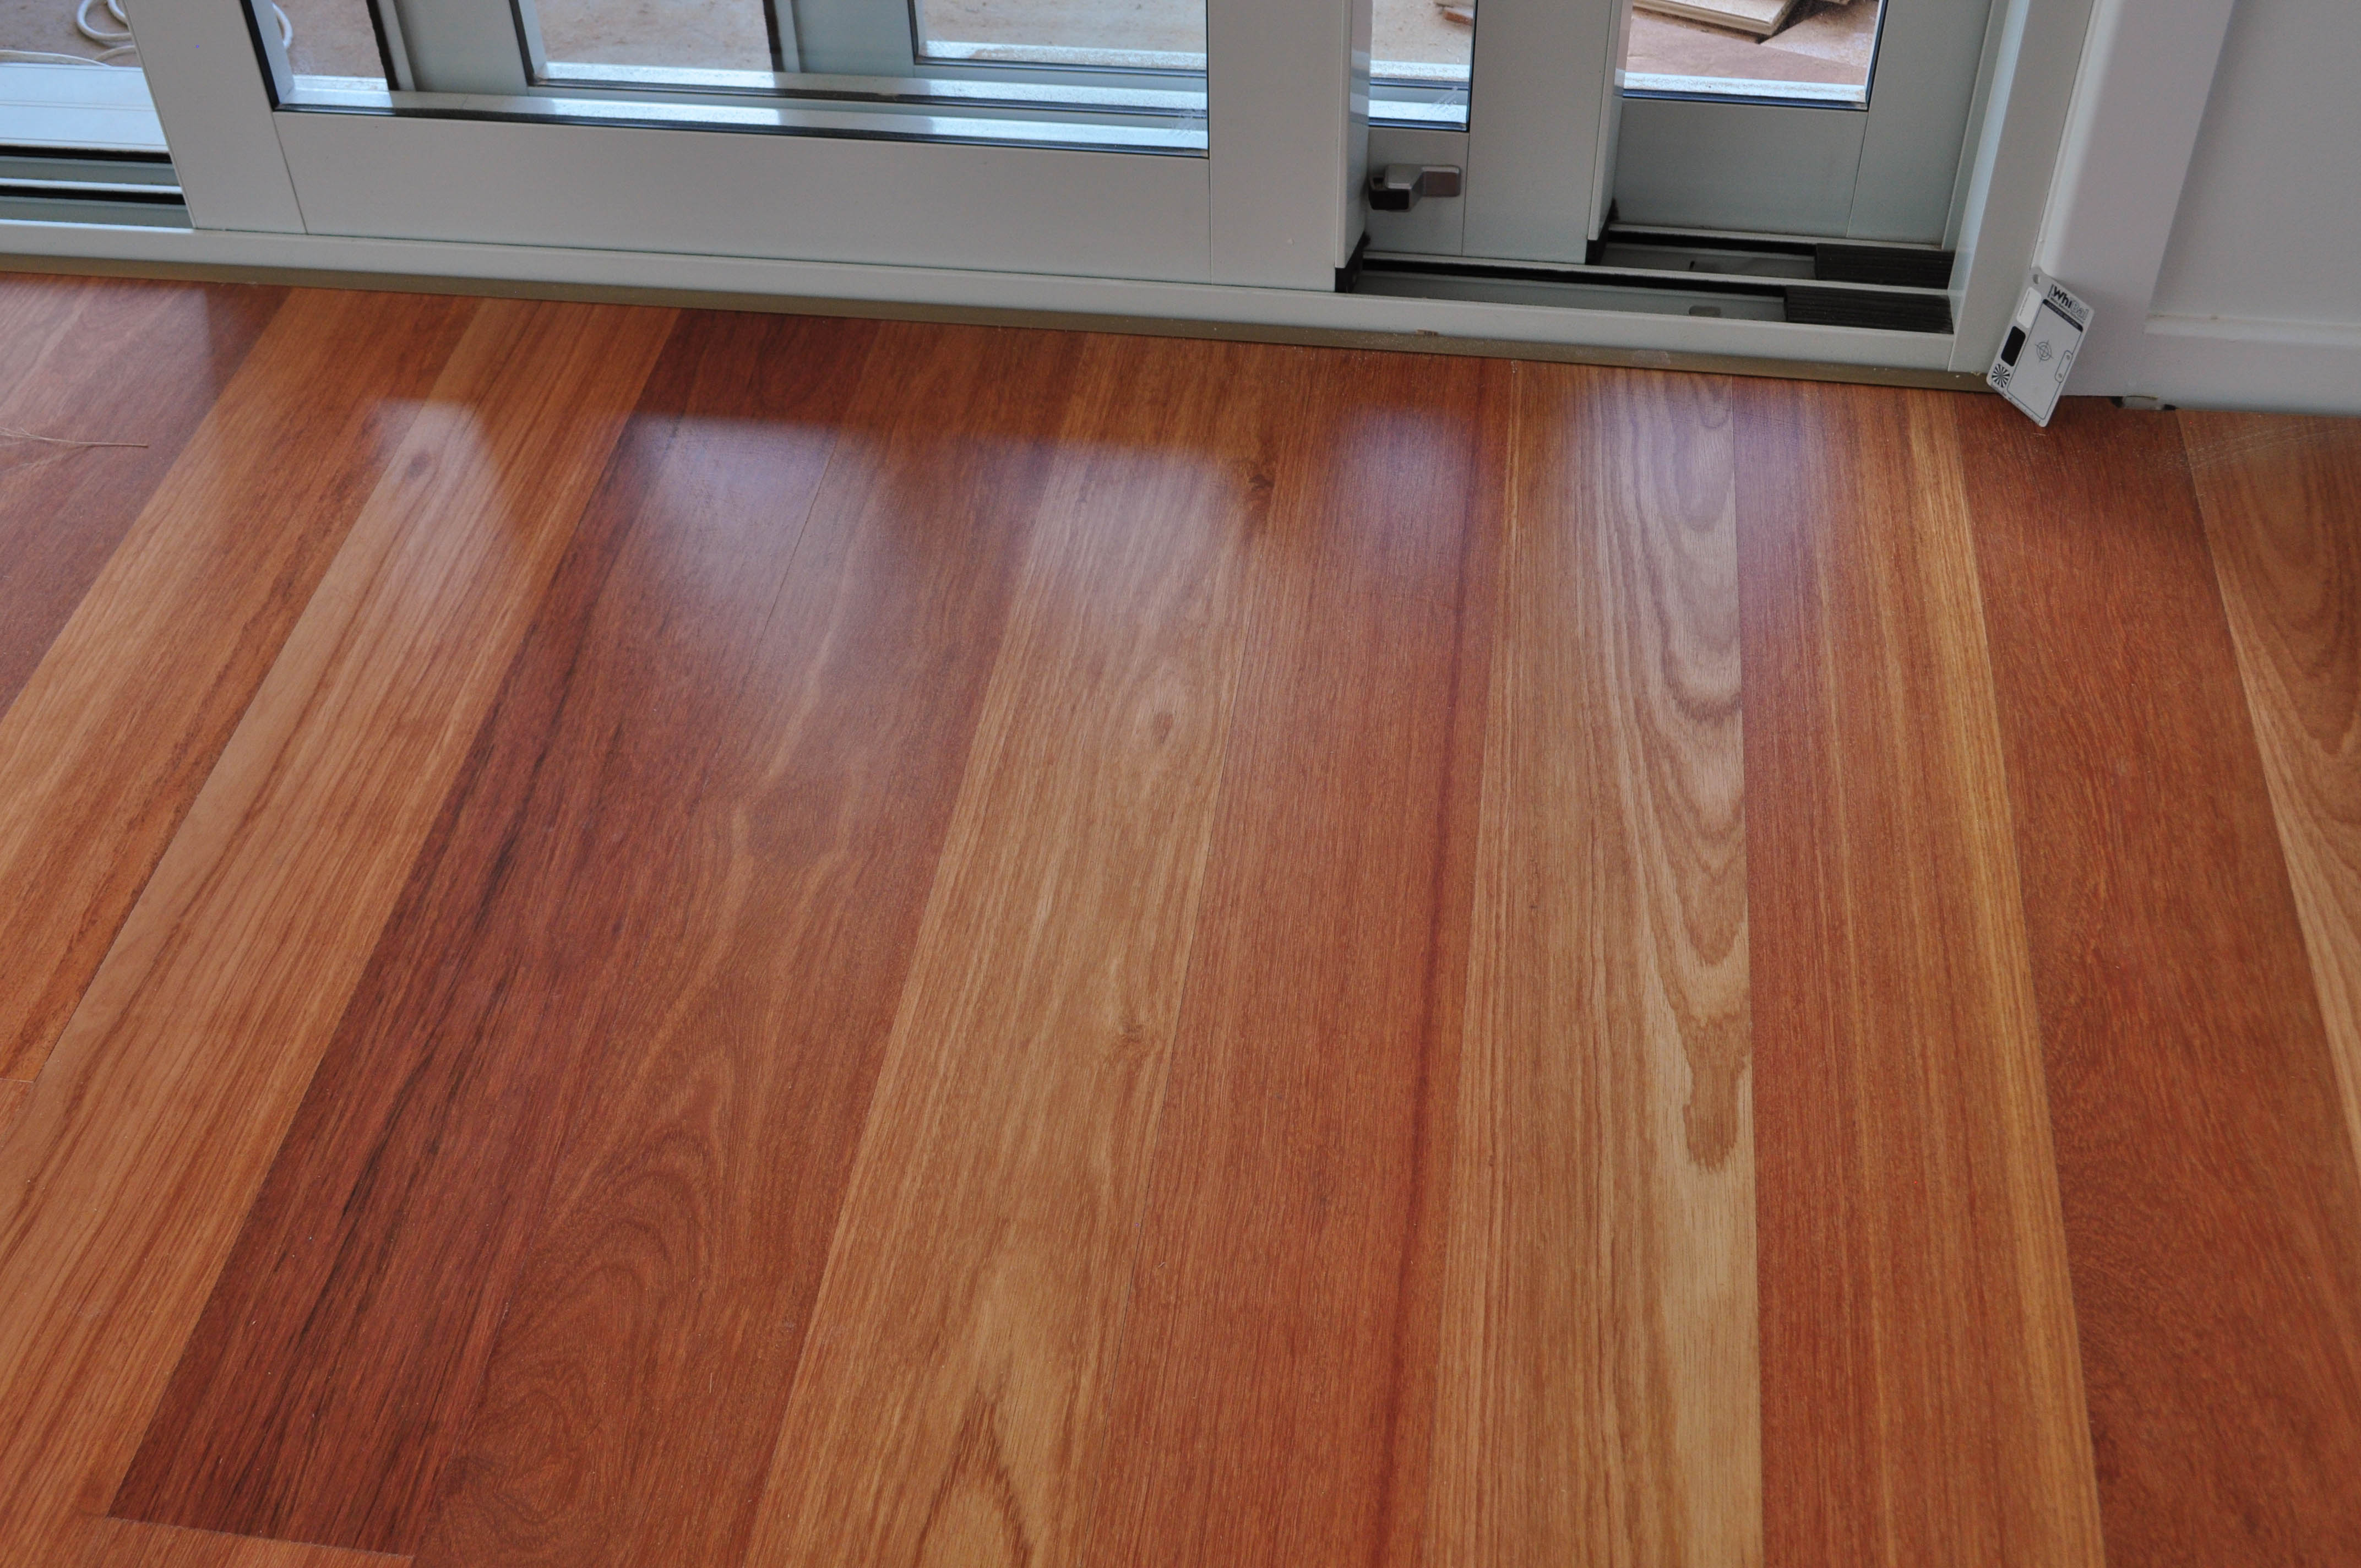 showing a dining room with the floor being floorboarded with the timber species -kempes.